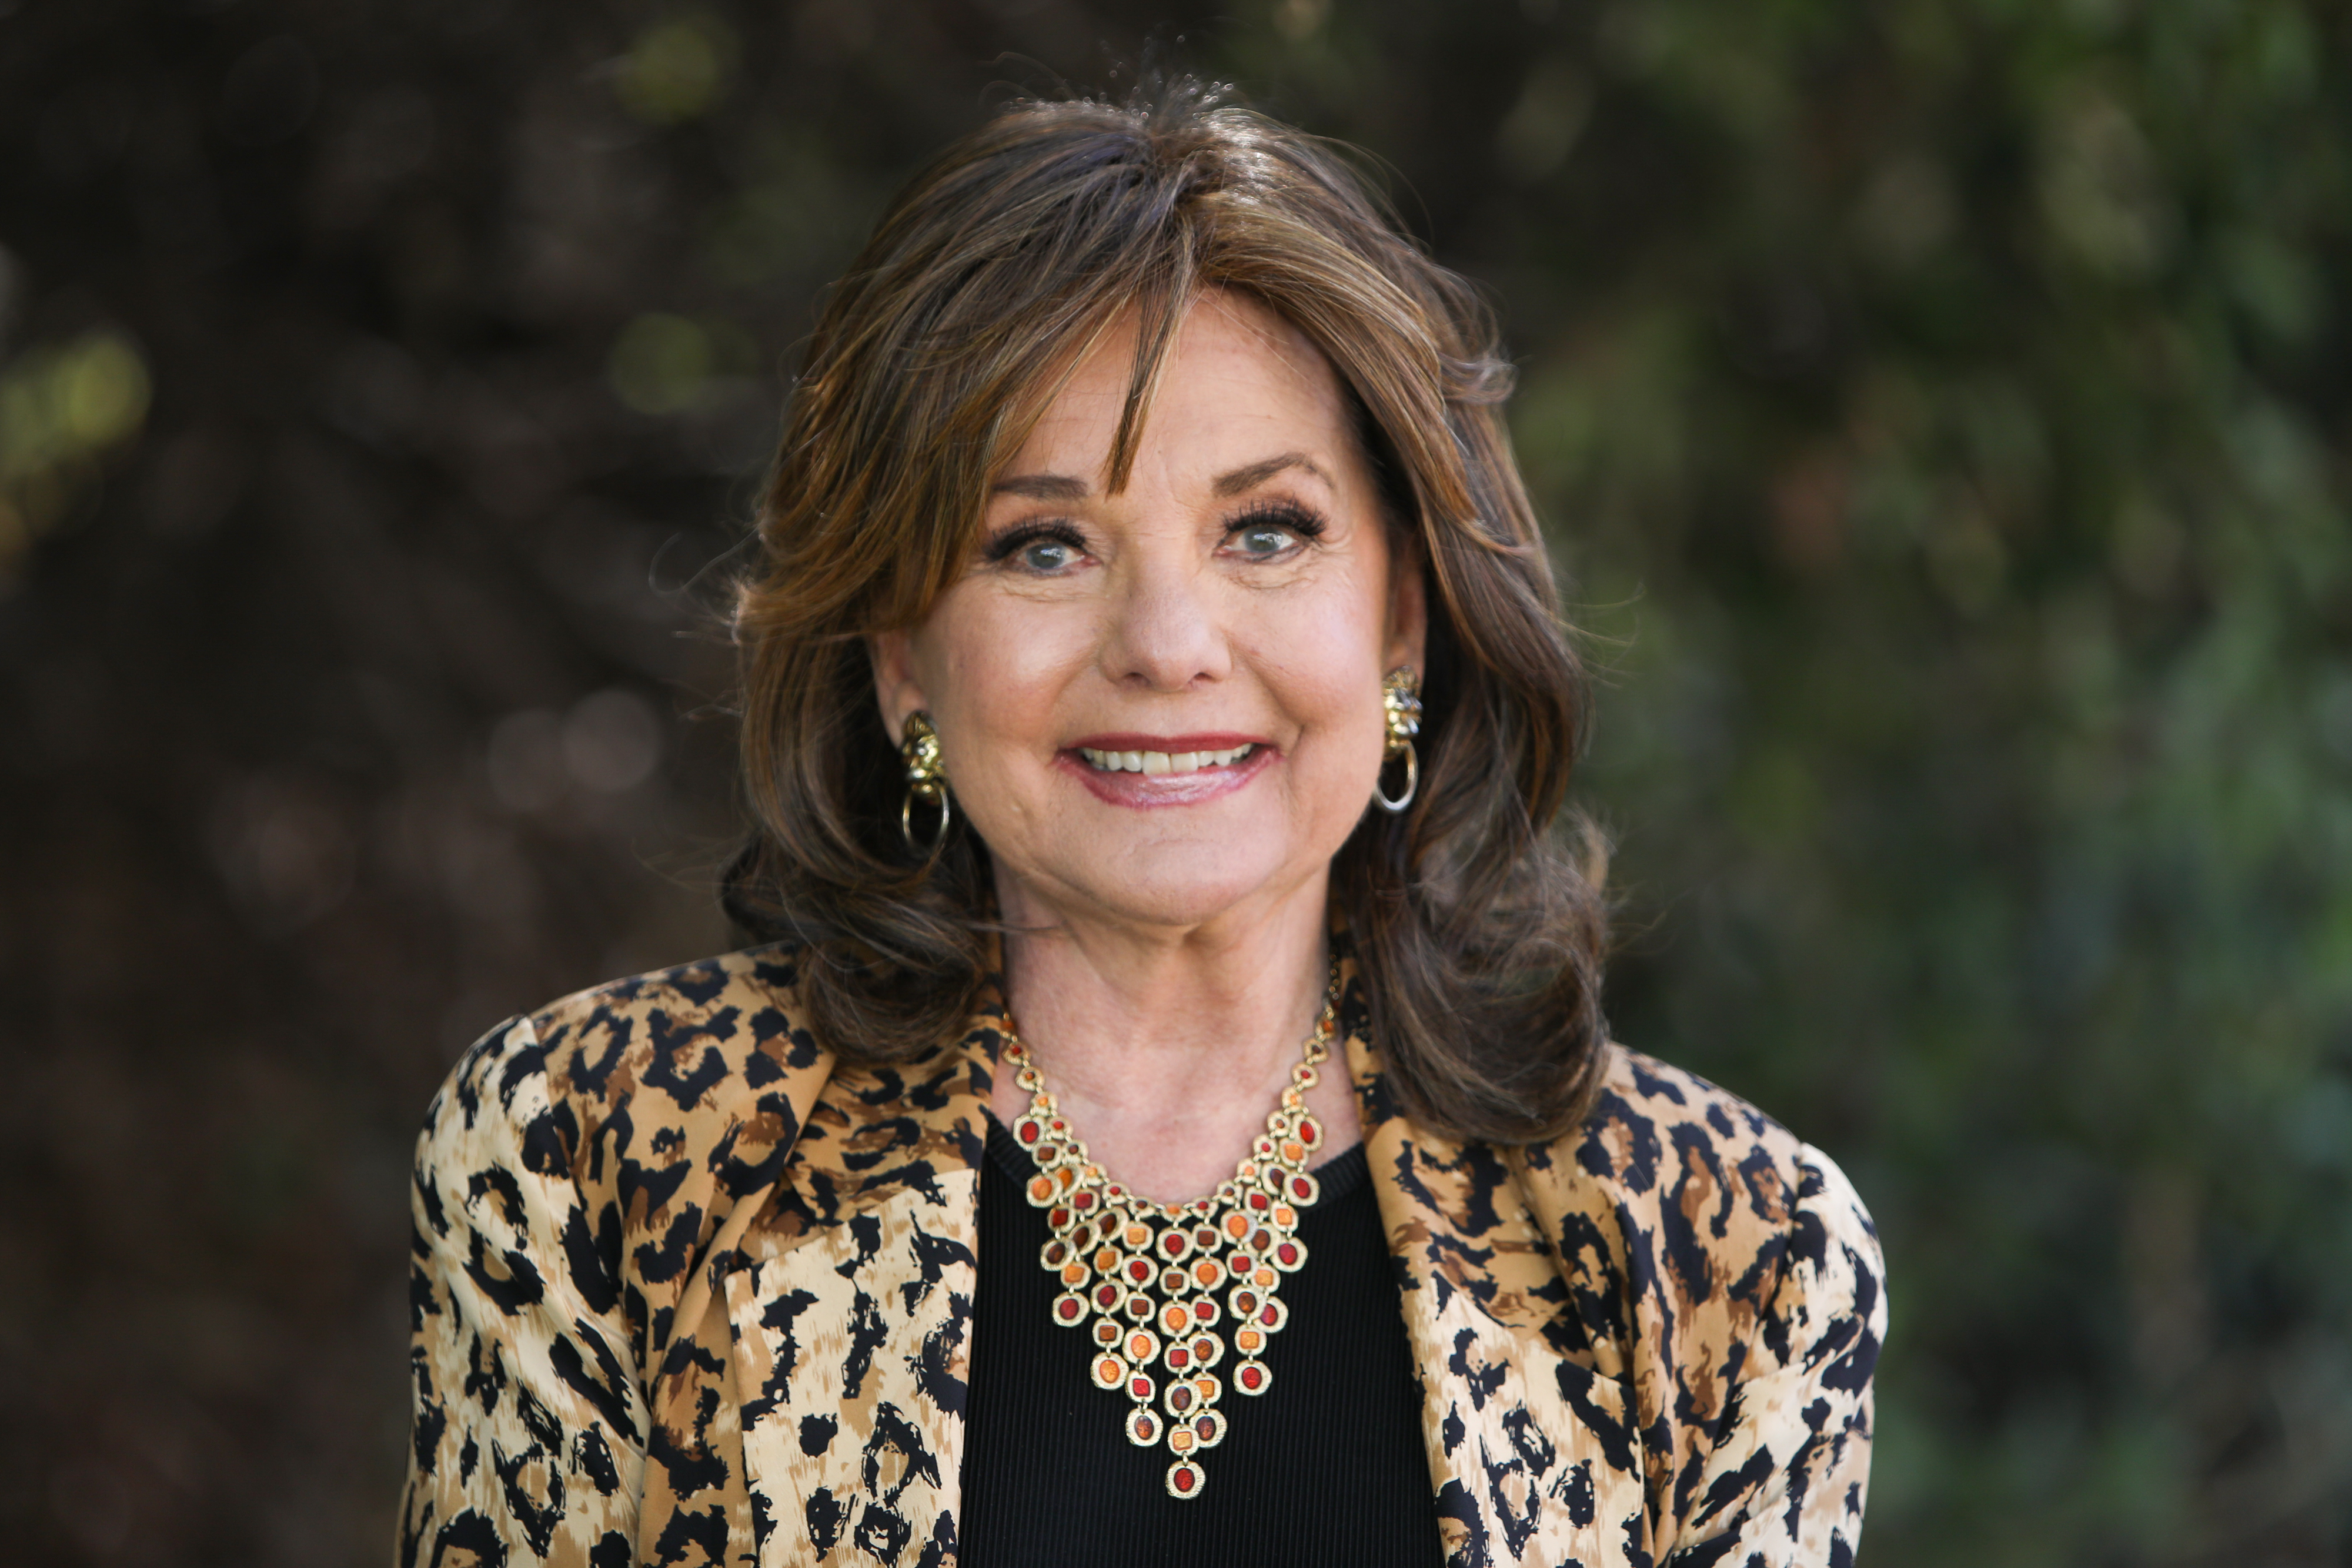 Dawn Wells visits Hallmark Channel's "Home & Family" on September 30, 2019, in Universal City, California | Source: Getty Images